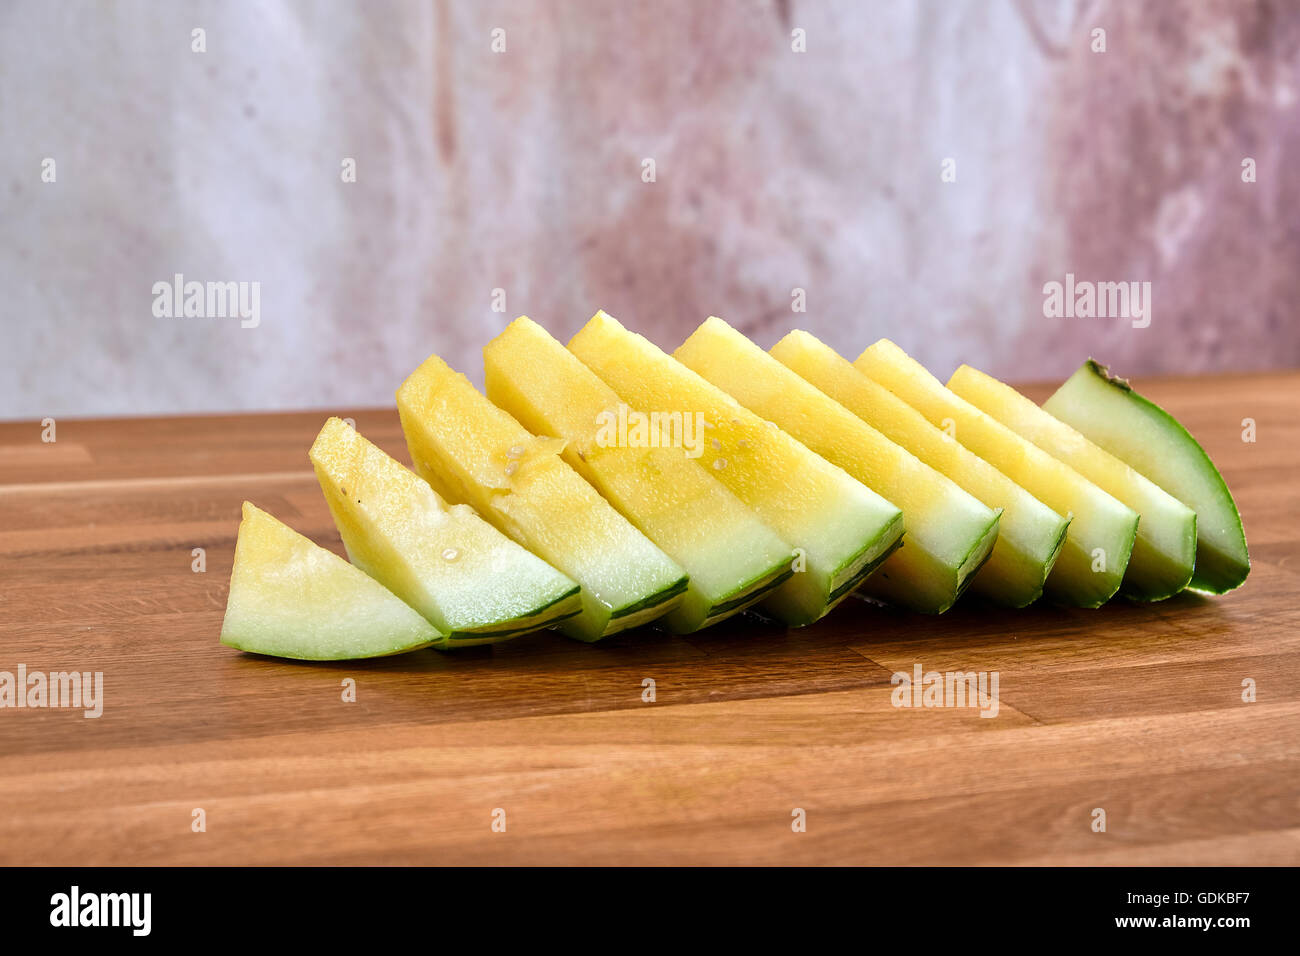 Yellow watermelon sliced in pieces, lying on a table of dark brown laminated hardwood Stock Photo